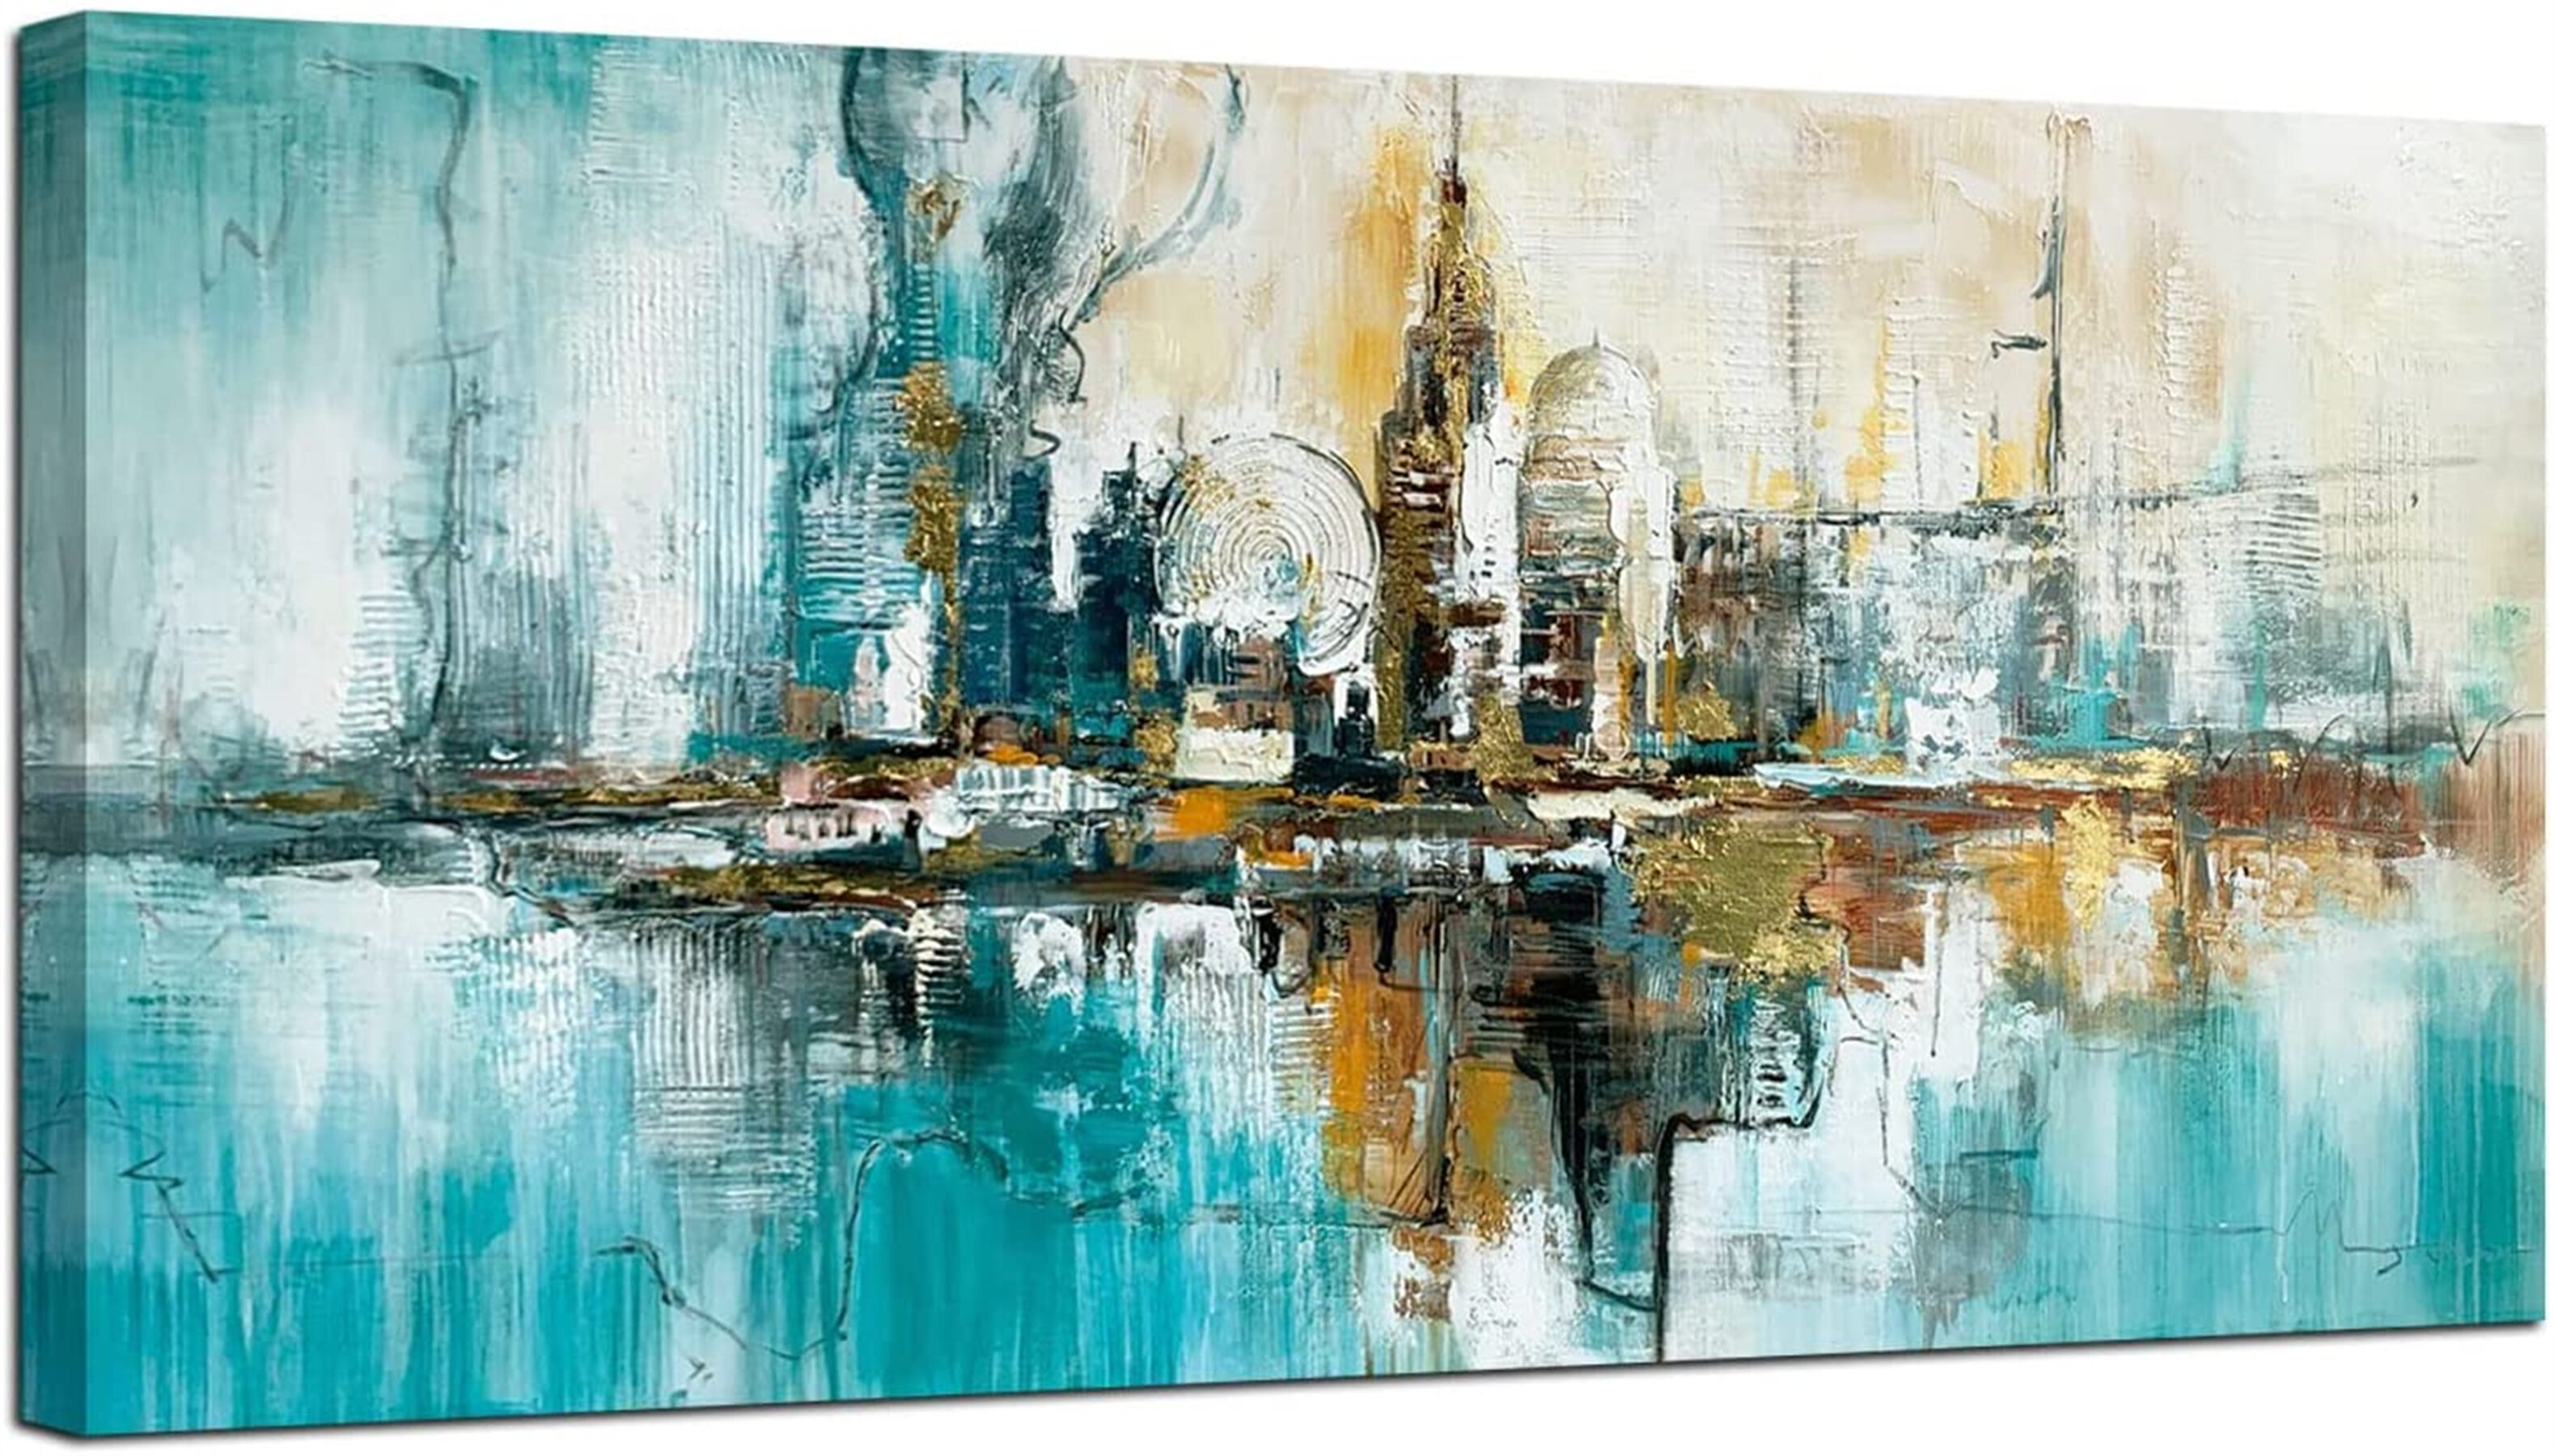 Modern City Bridge Art Canvas Oil Painting Picture Print Home Room Wall Decor